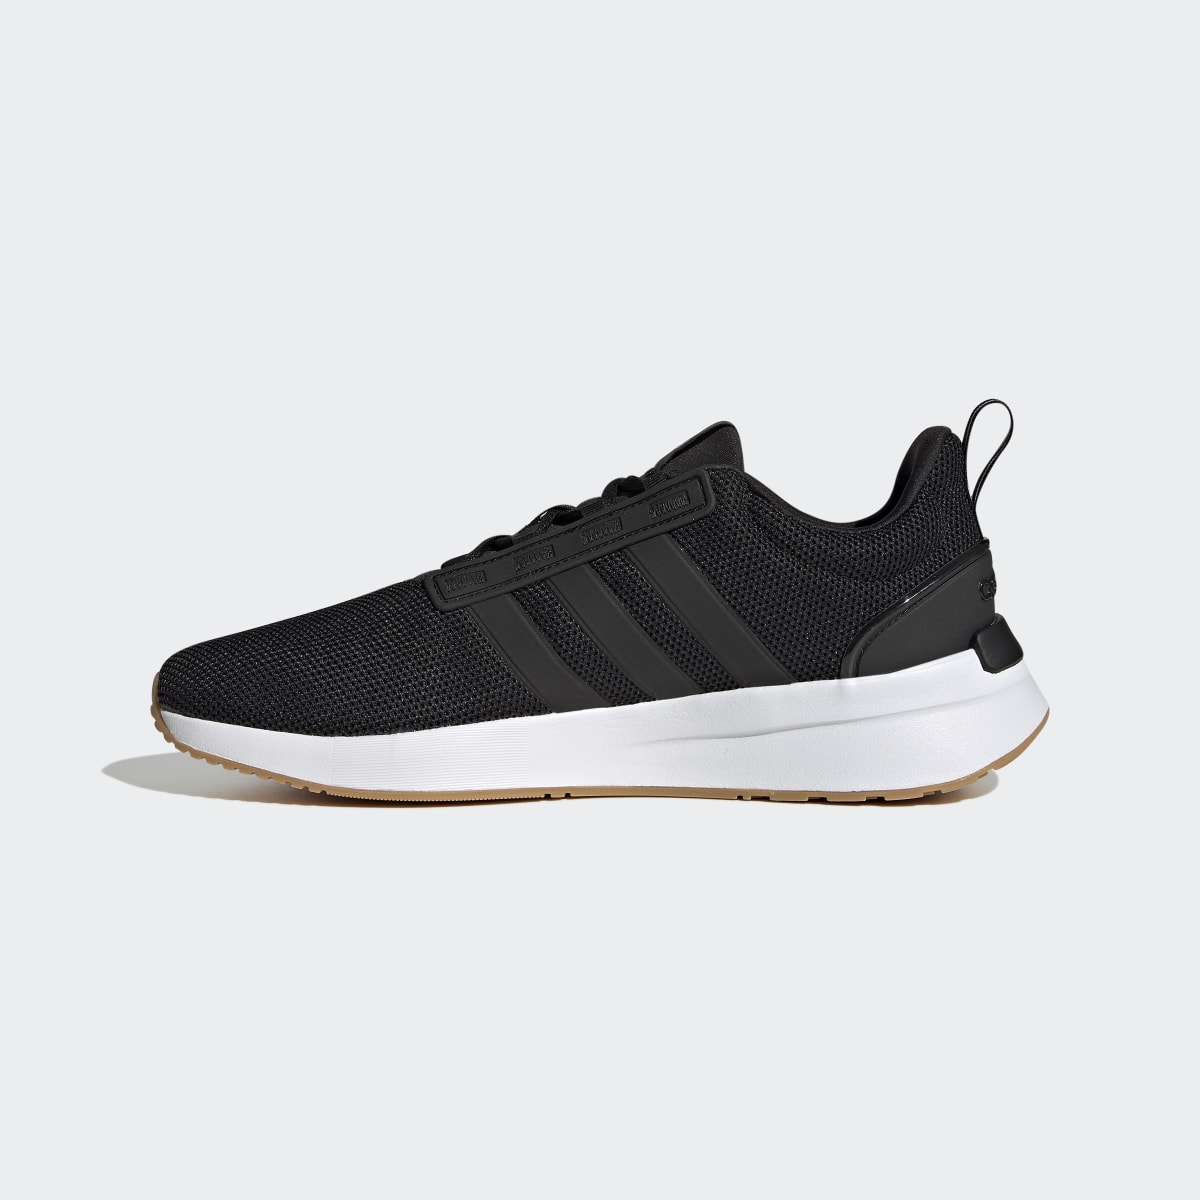 Adidas Racer TR21 Shoes. 7